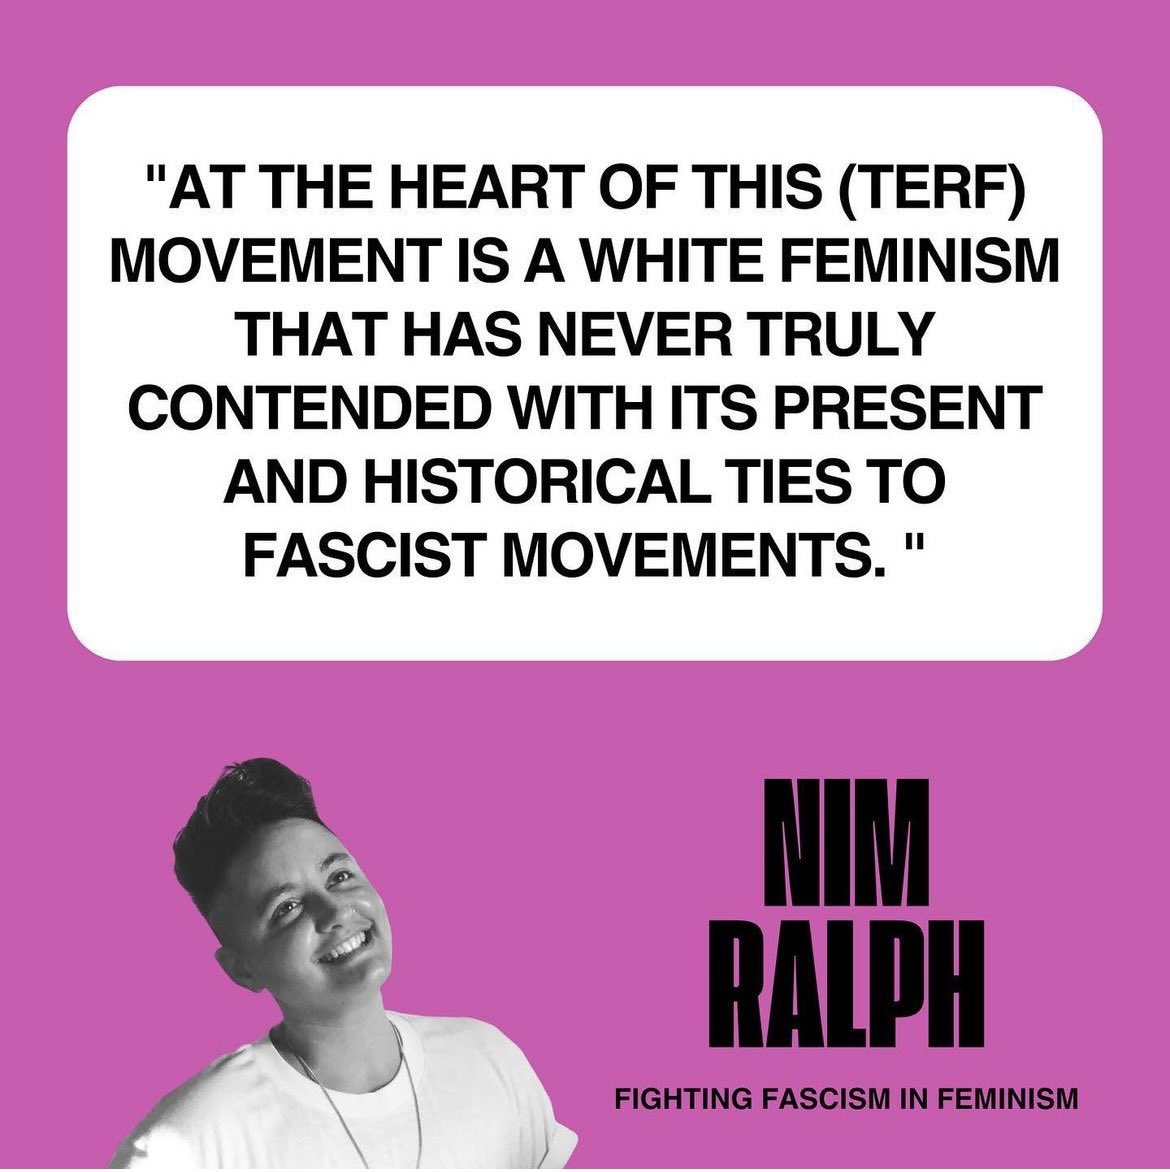 Fighting Fascism in Feminism Read the @briarpatchmag article by @ChanelleGallant here: tinyurl.com/mpnj7c2p